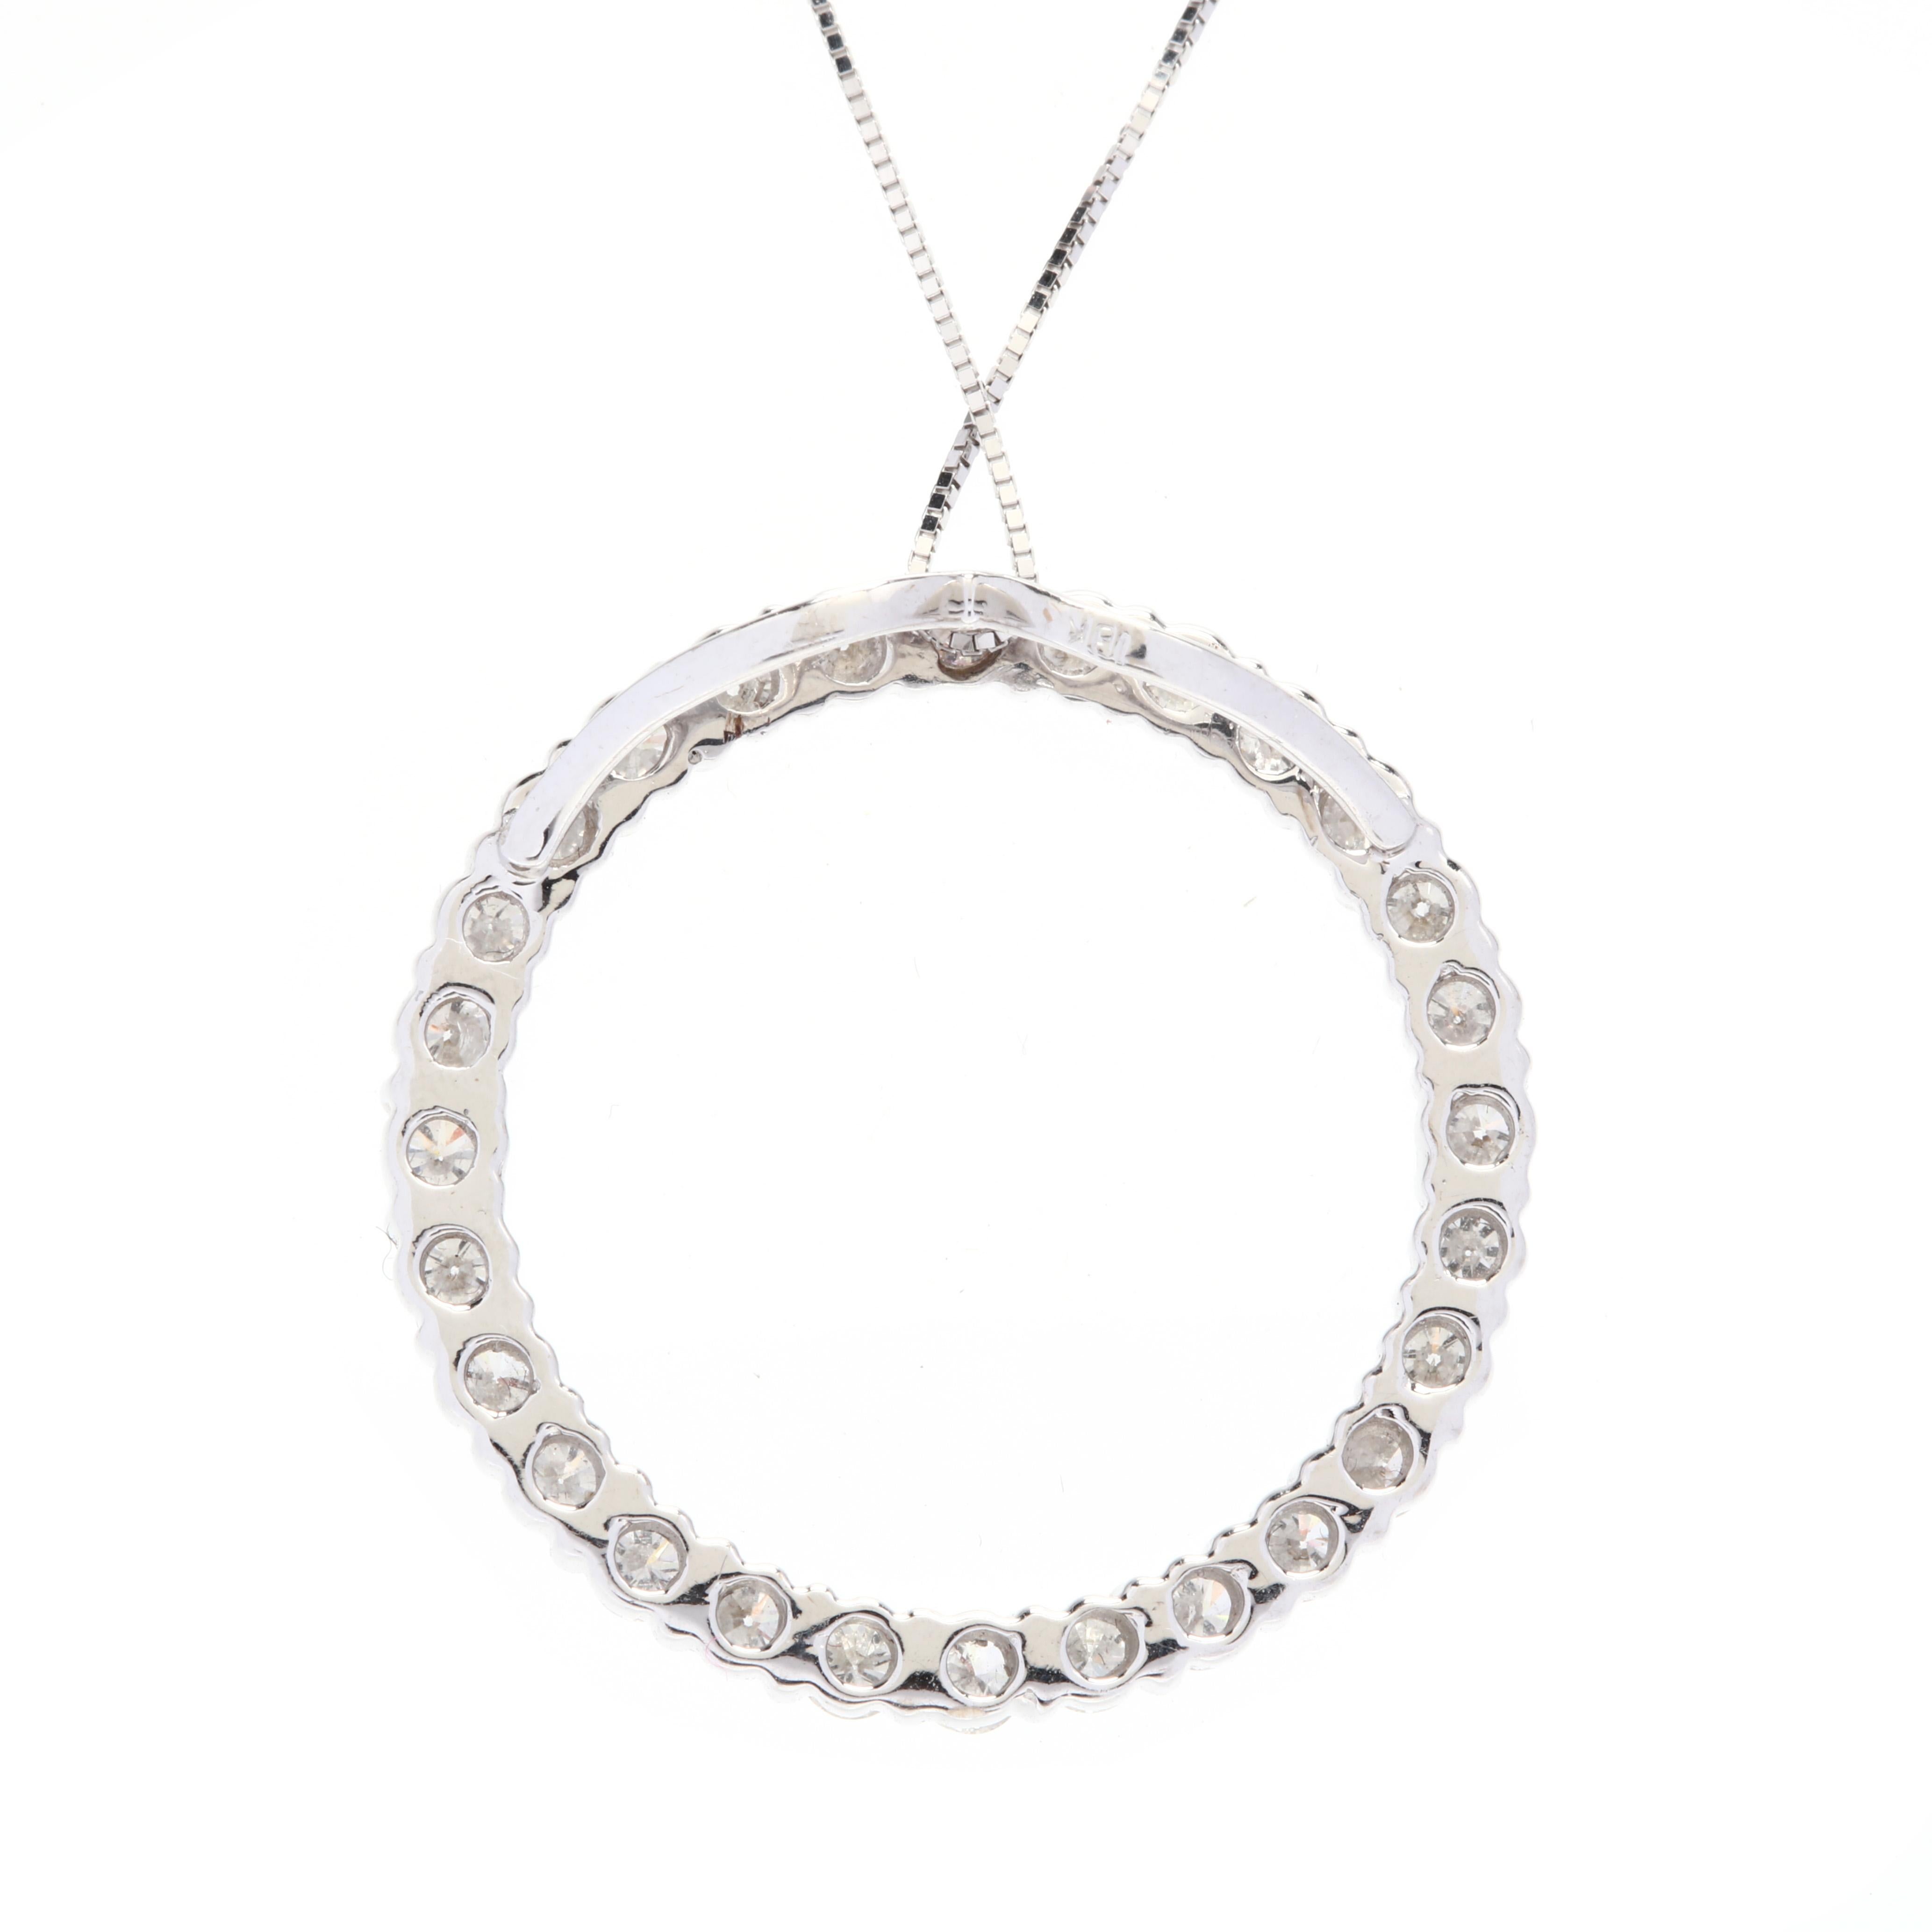 A 14 karat white gold and diamond circle pendant necklace. This necklace features an open circular design set with full cut round diamonds weighing approximately 1.68 total carats and with a hidden bail suspended from a thin box chain.

Stones:
-